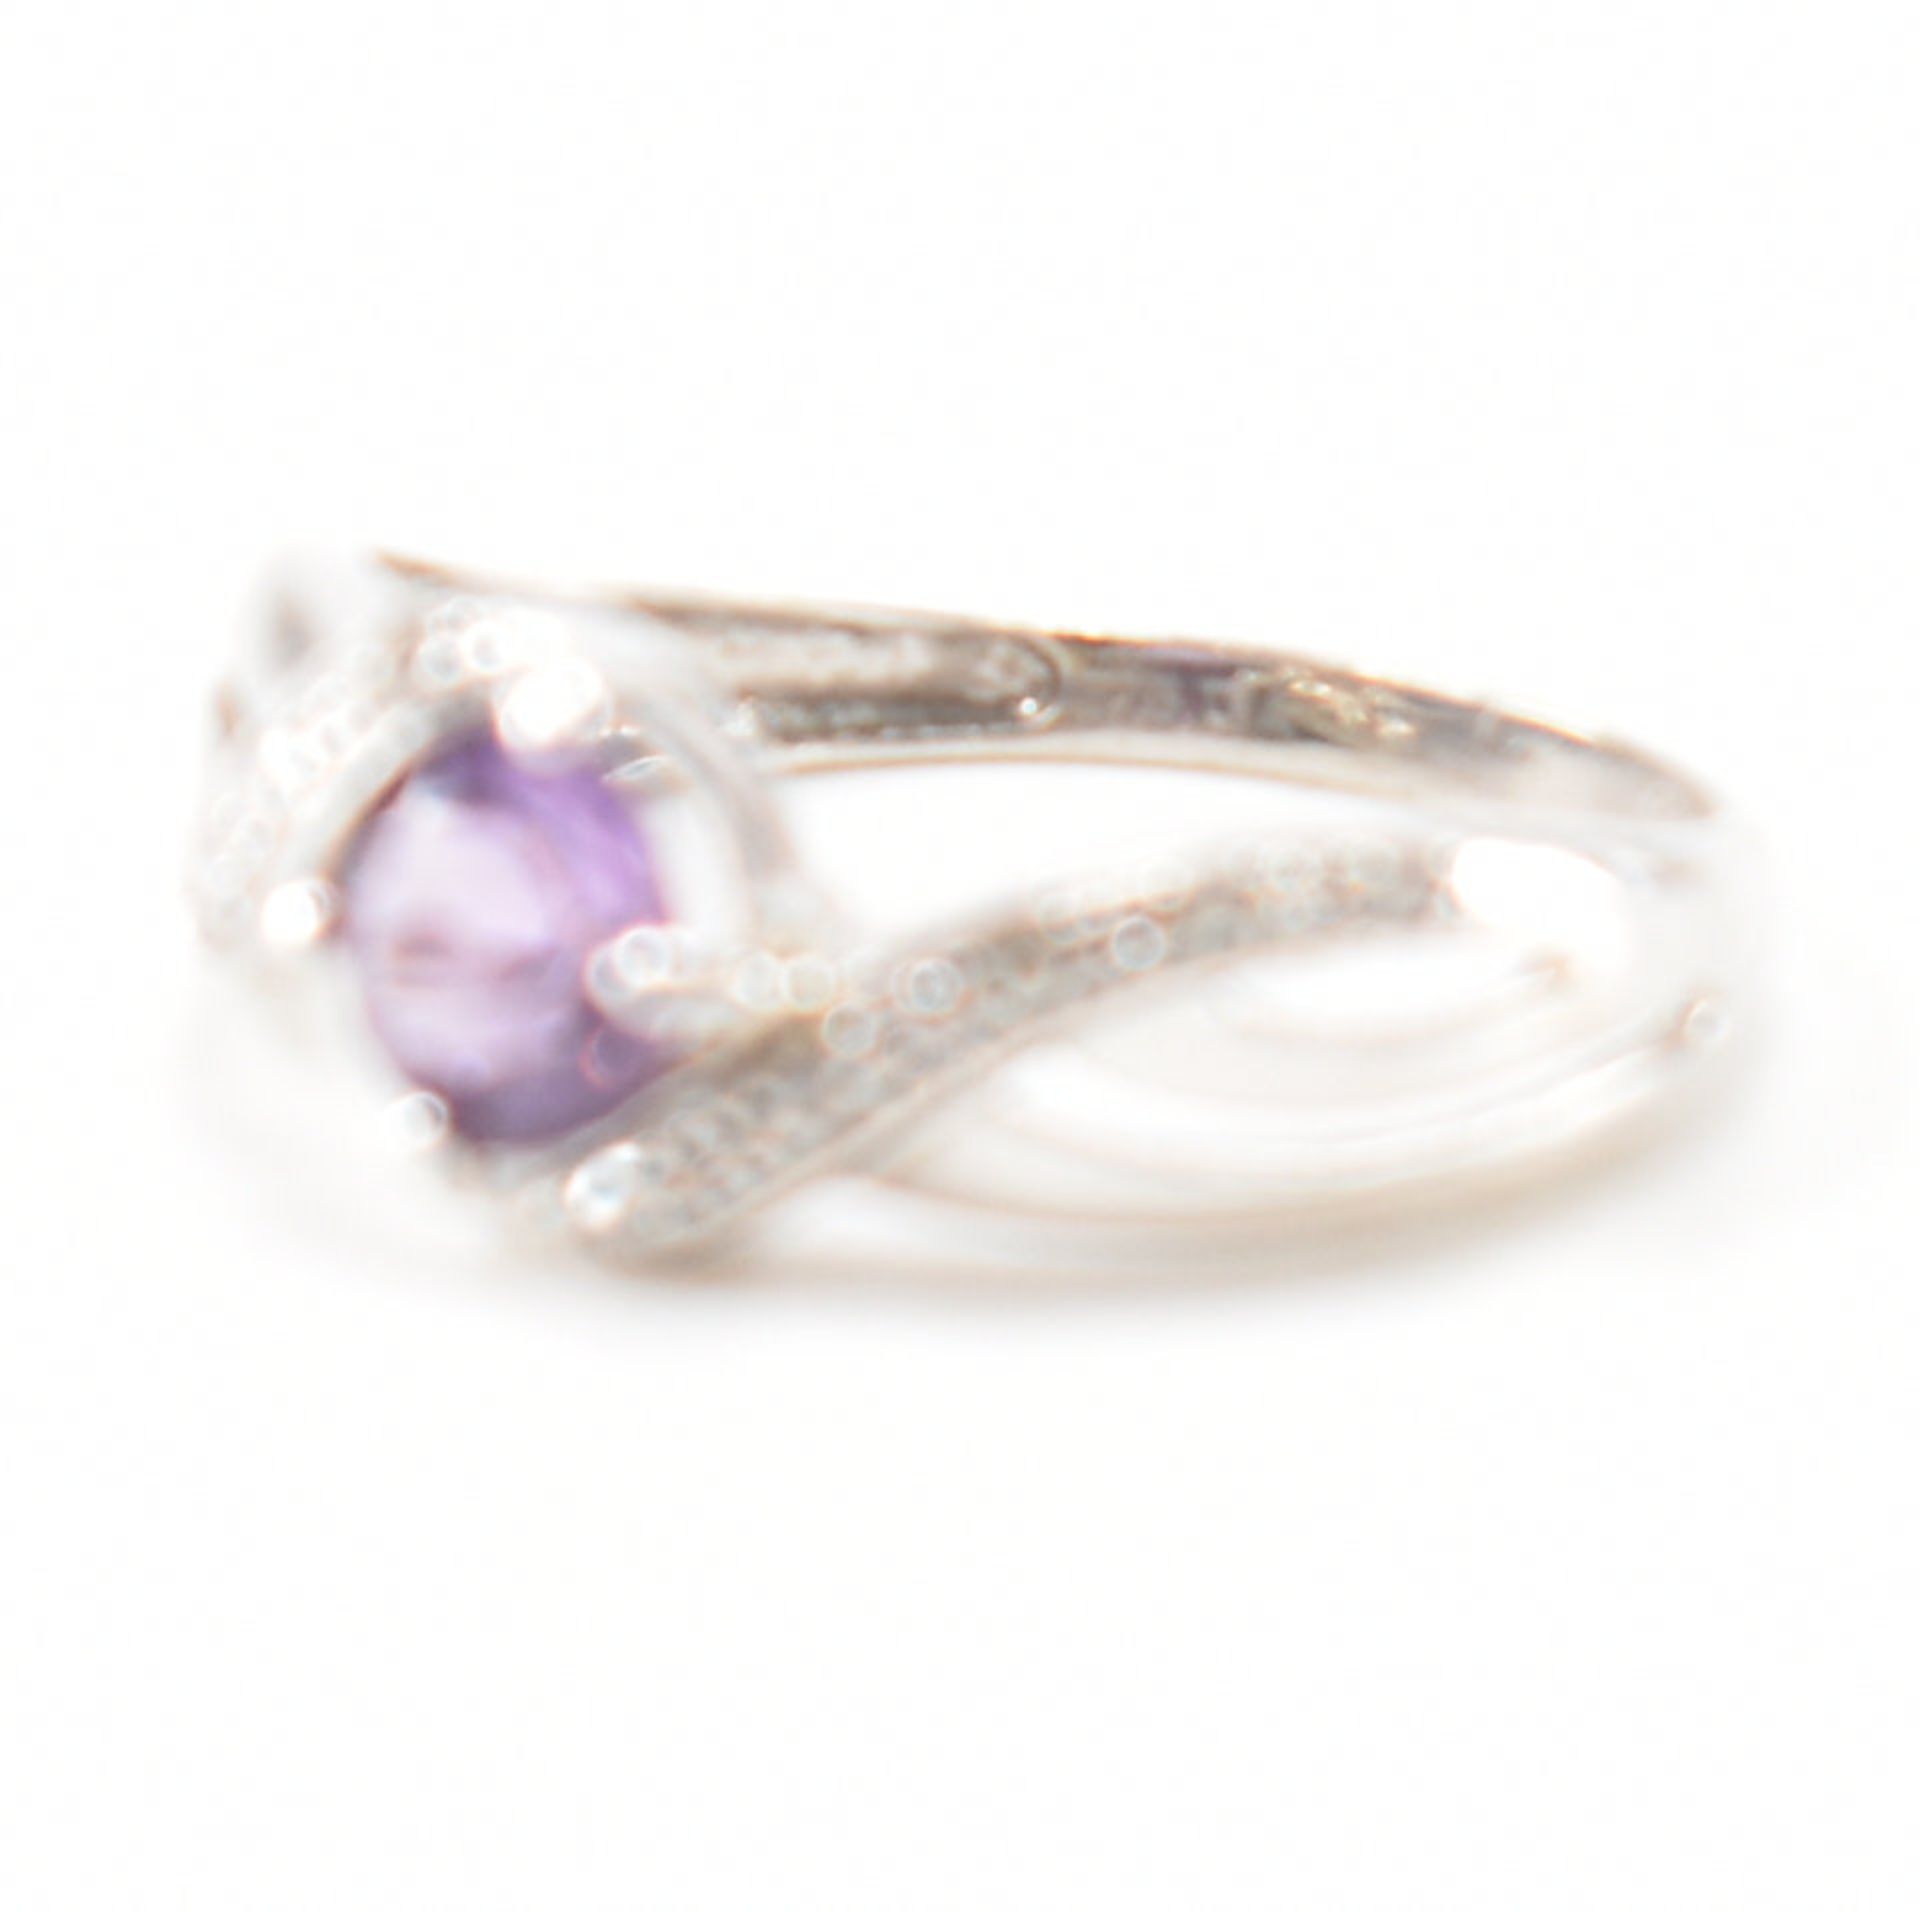 HALLMARKED 9CT WHITE GOLD AMETHYST & DIAMOND CROSSOVER RING - Image 7 of 9